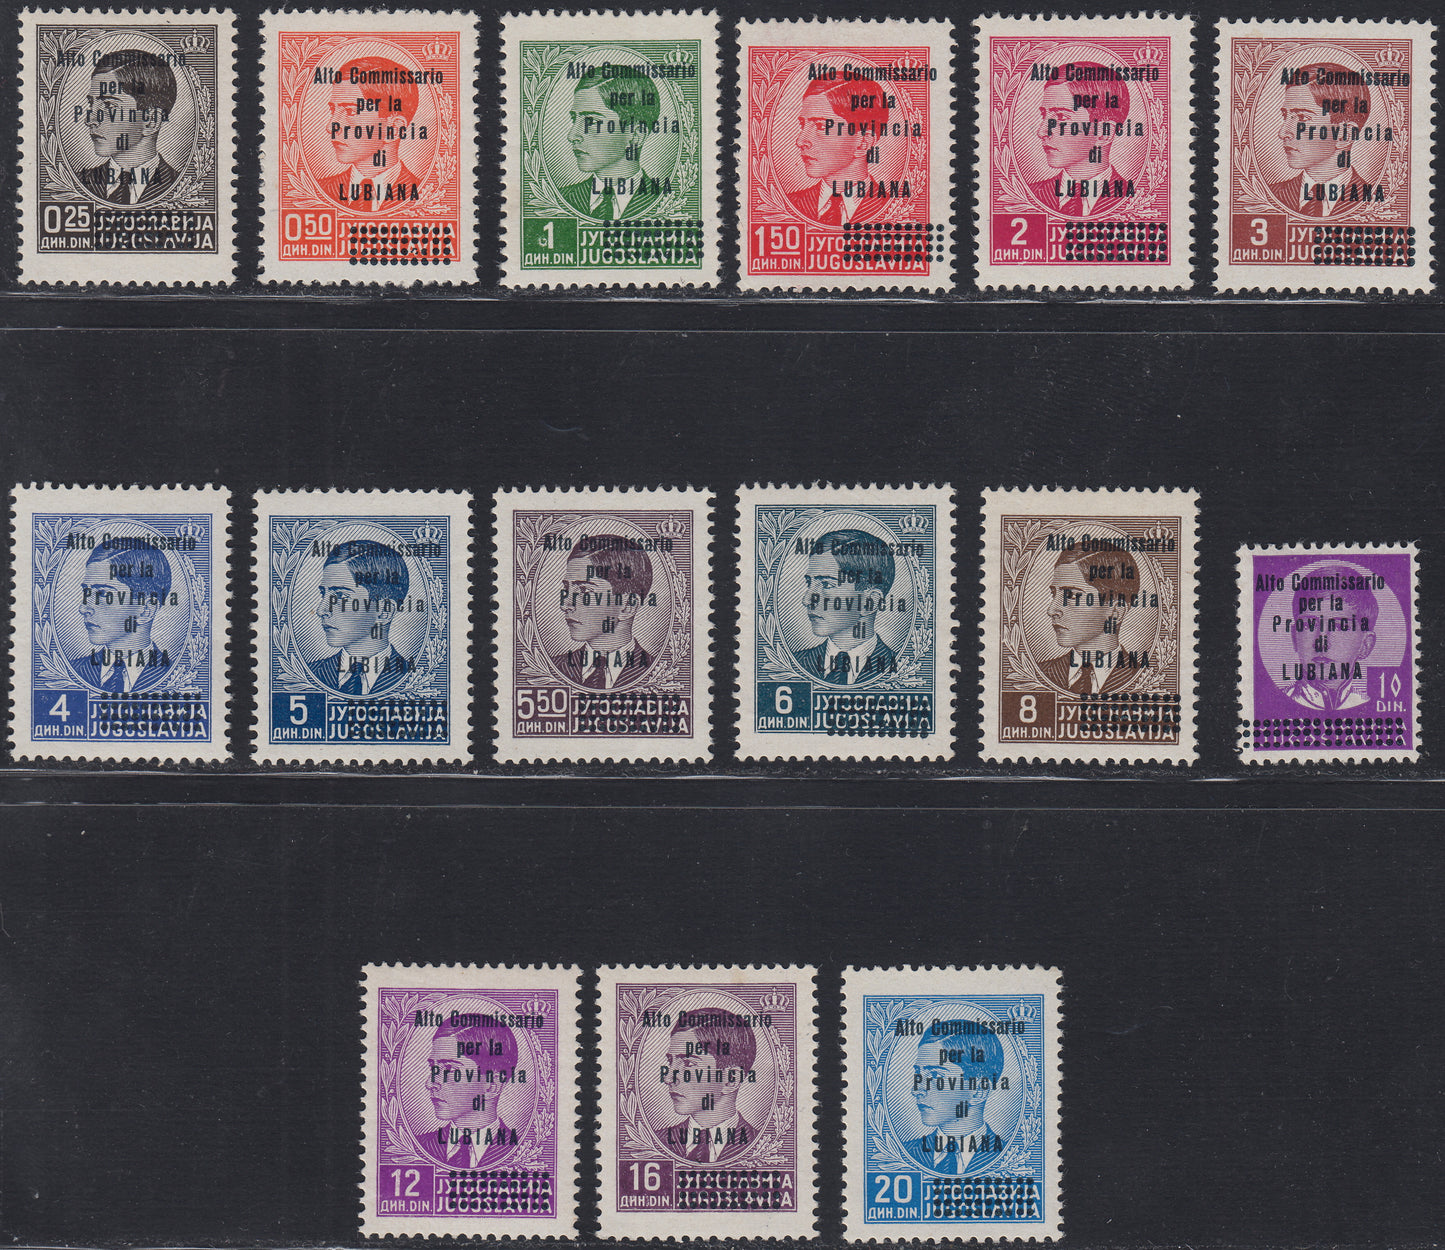 Lub65 - 1941 - Italian occupation of Ljubljana, set of 15 stamps with overprint "High Commissioner / for the / province / of / LJUBLJANA" new with original gum (42/56).